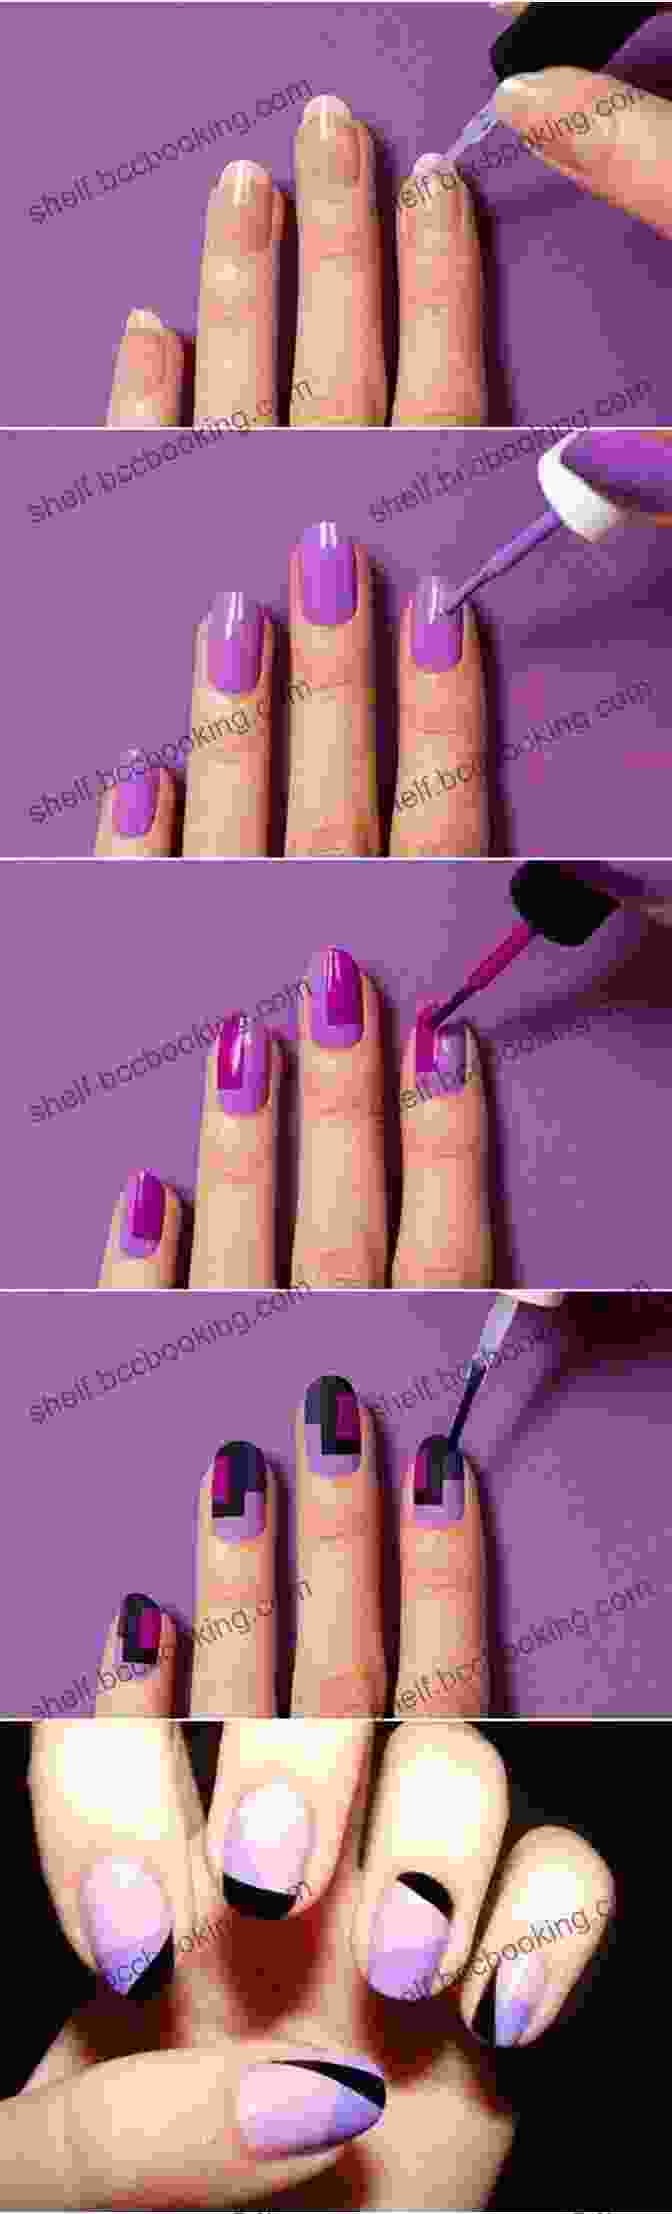 Image Of Step By Step Nail Painting Tutorial ACRYLIC NAIL PAINTING BOOK: Beginners Guide To Acrylic Nail Painting And Lots More